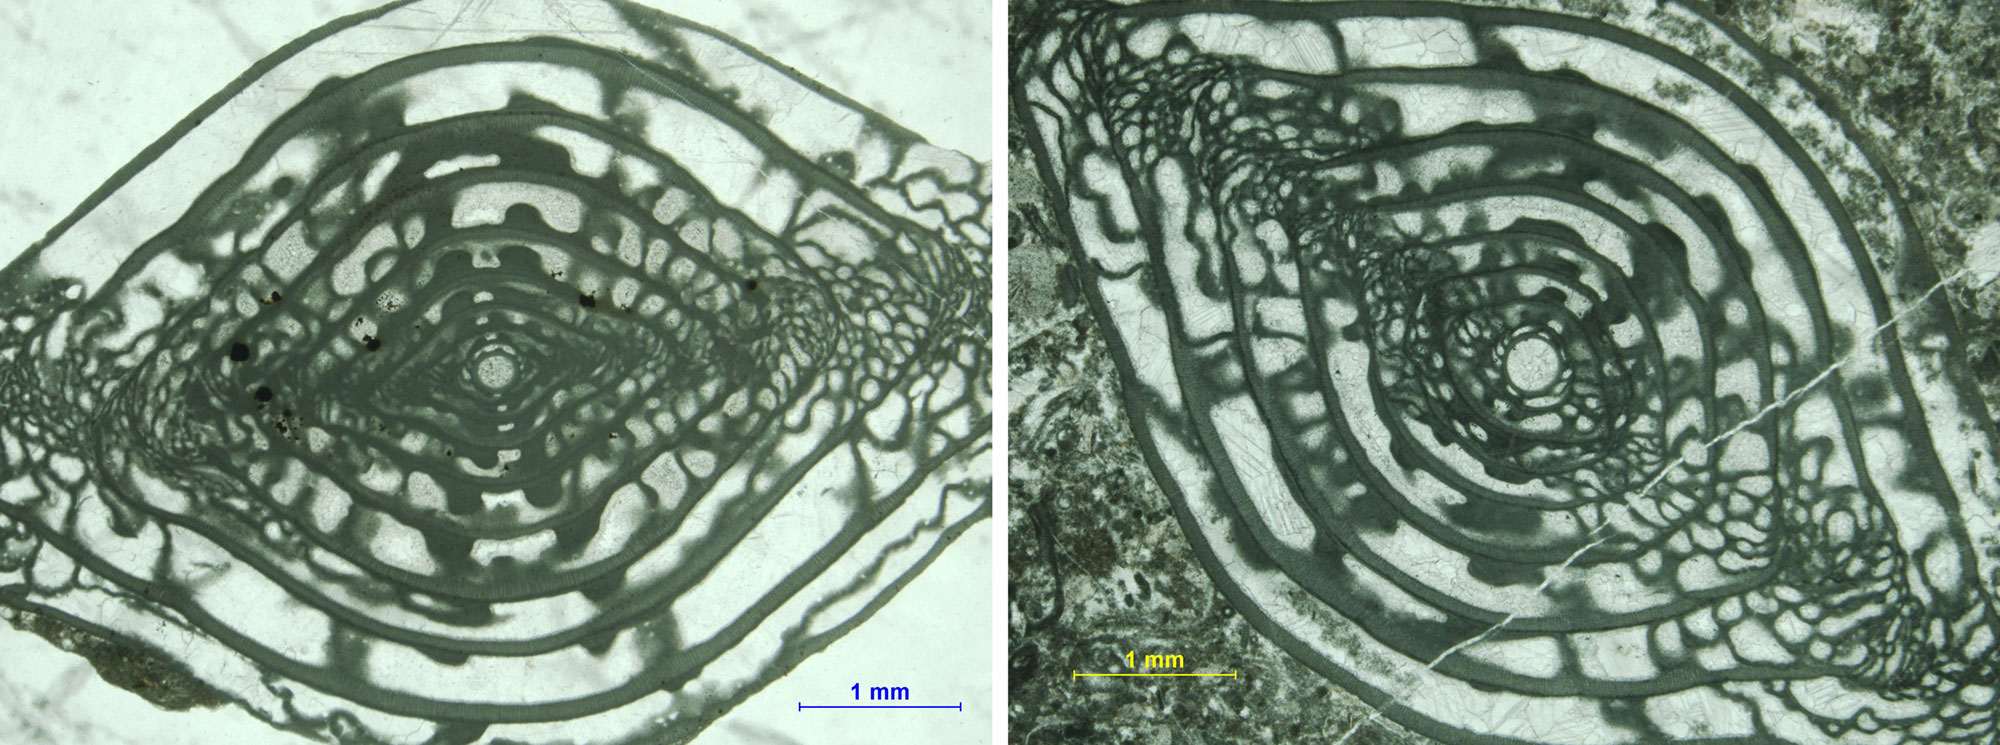 2-panel image showing large fusilinid fossils from the Pennsylvanian of New Mexico in section. Both photos show fusiform structures (structures that taper at the sides) made up of a concentric series of shell layers.